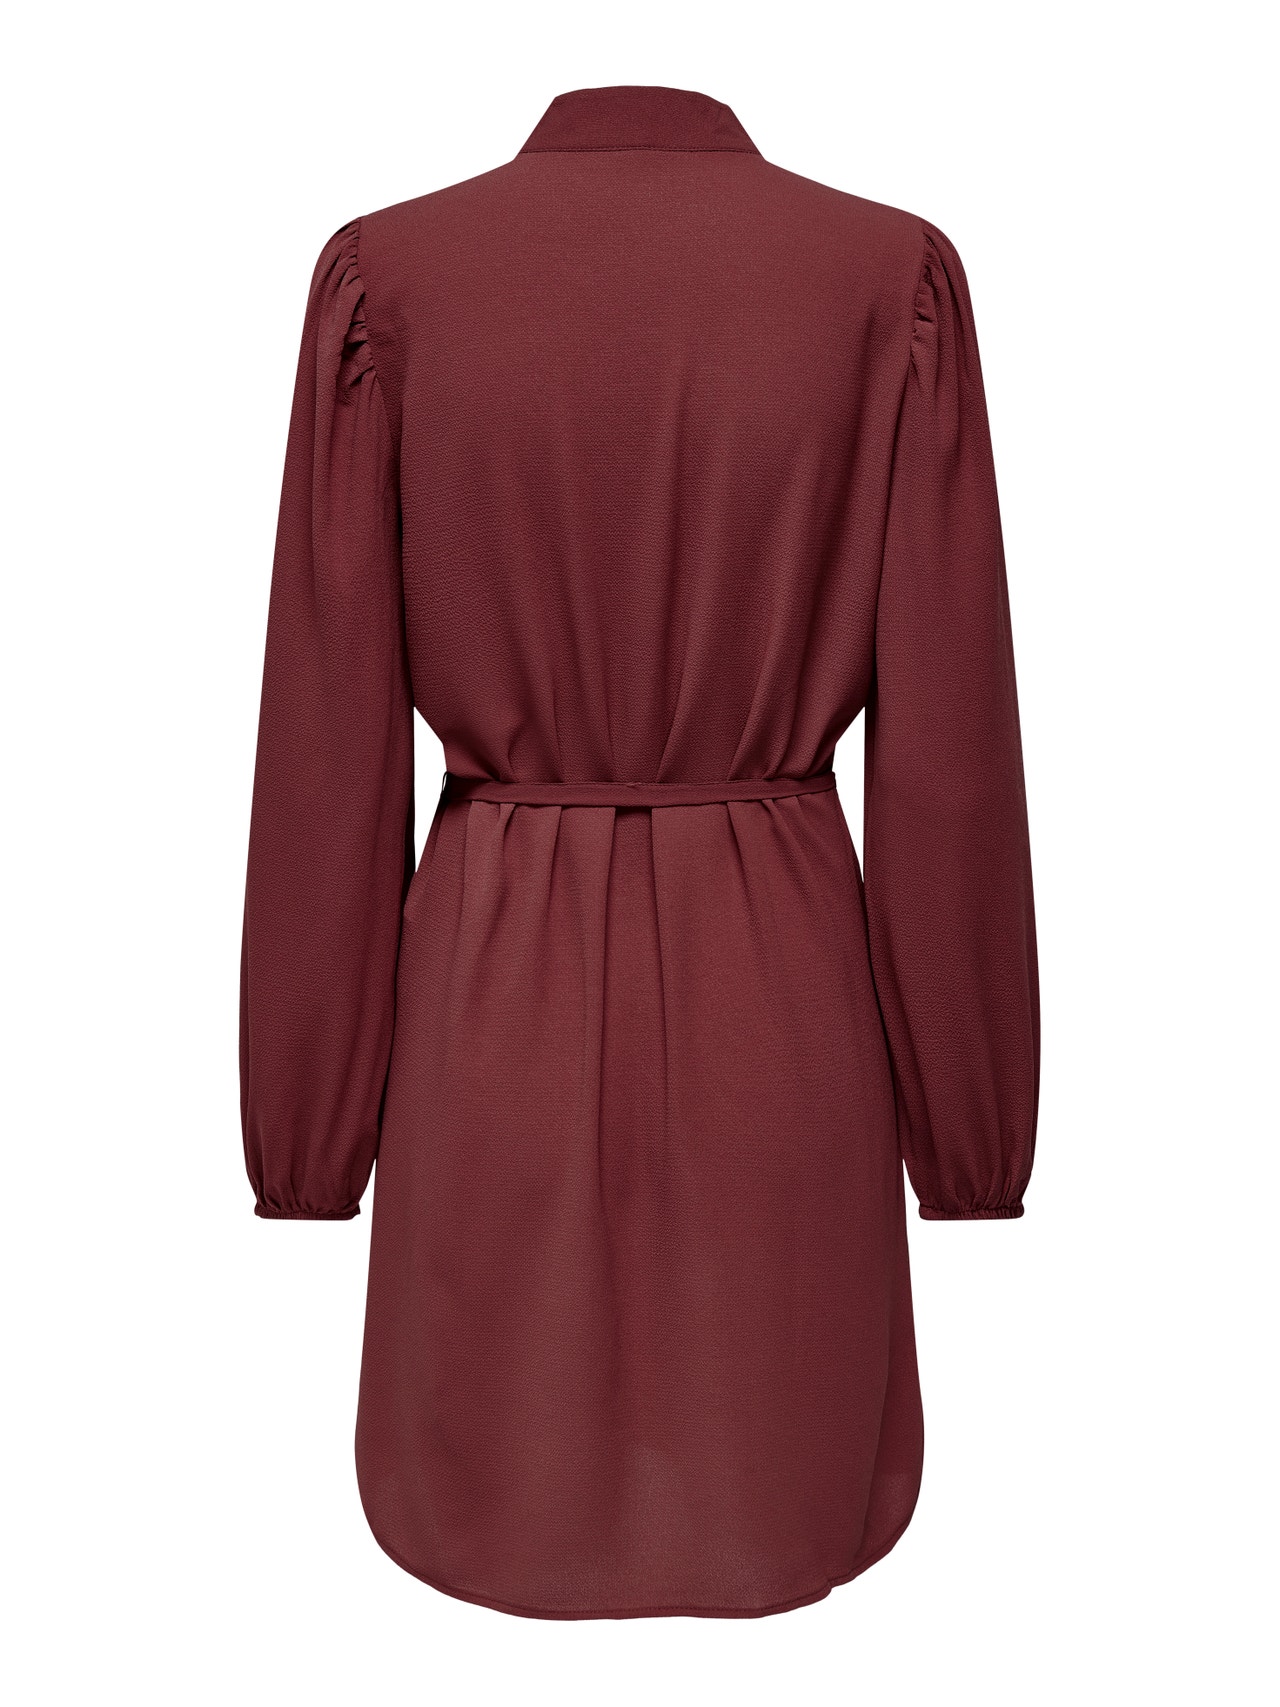 ONLY Long sleeved Shirt dress -Oxblood Red - 15282546